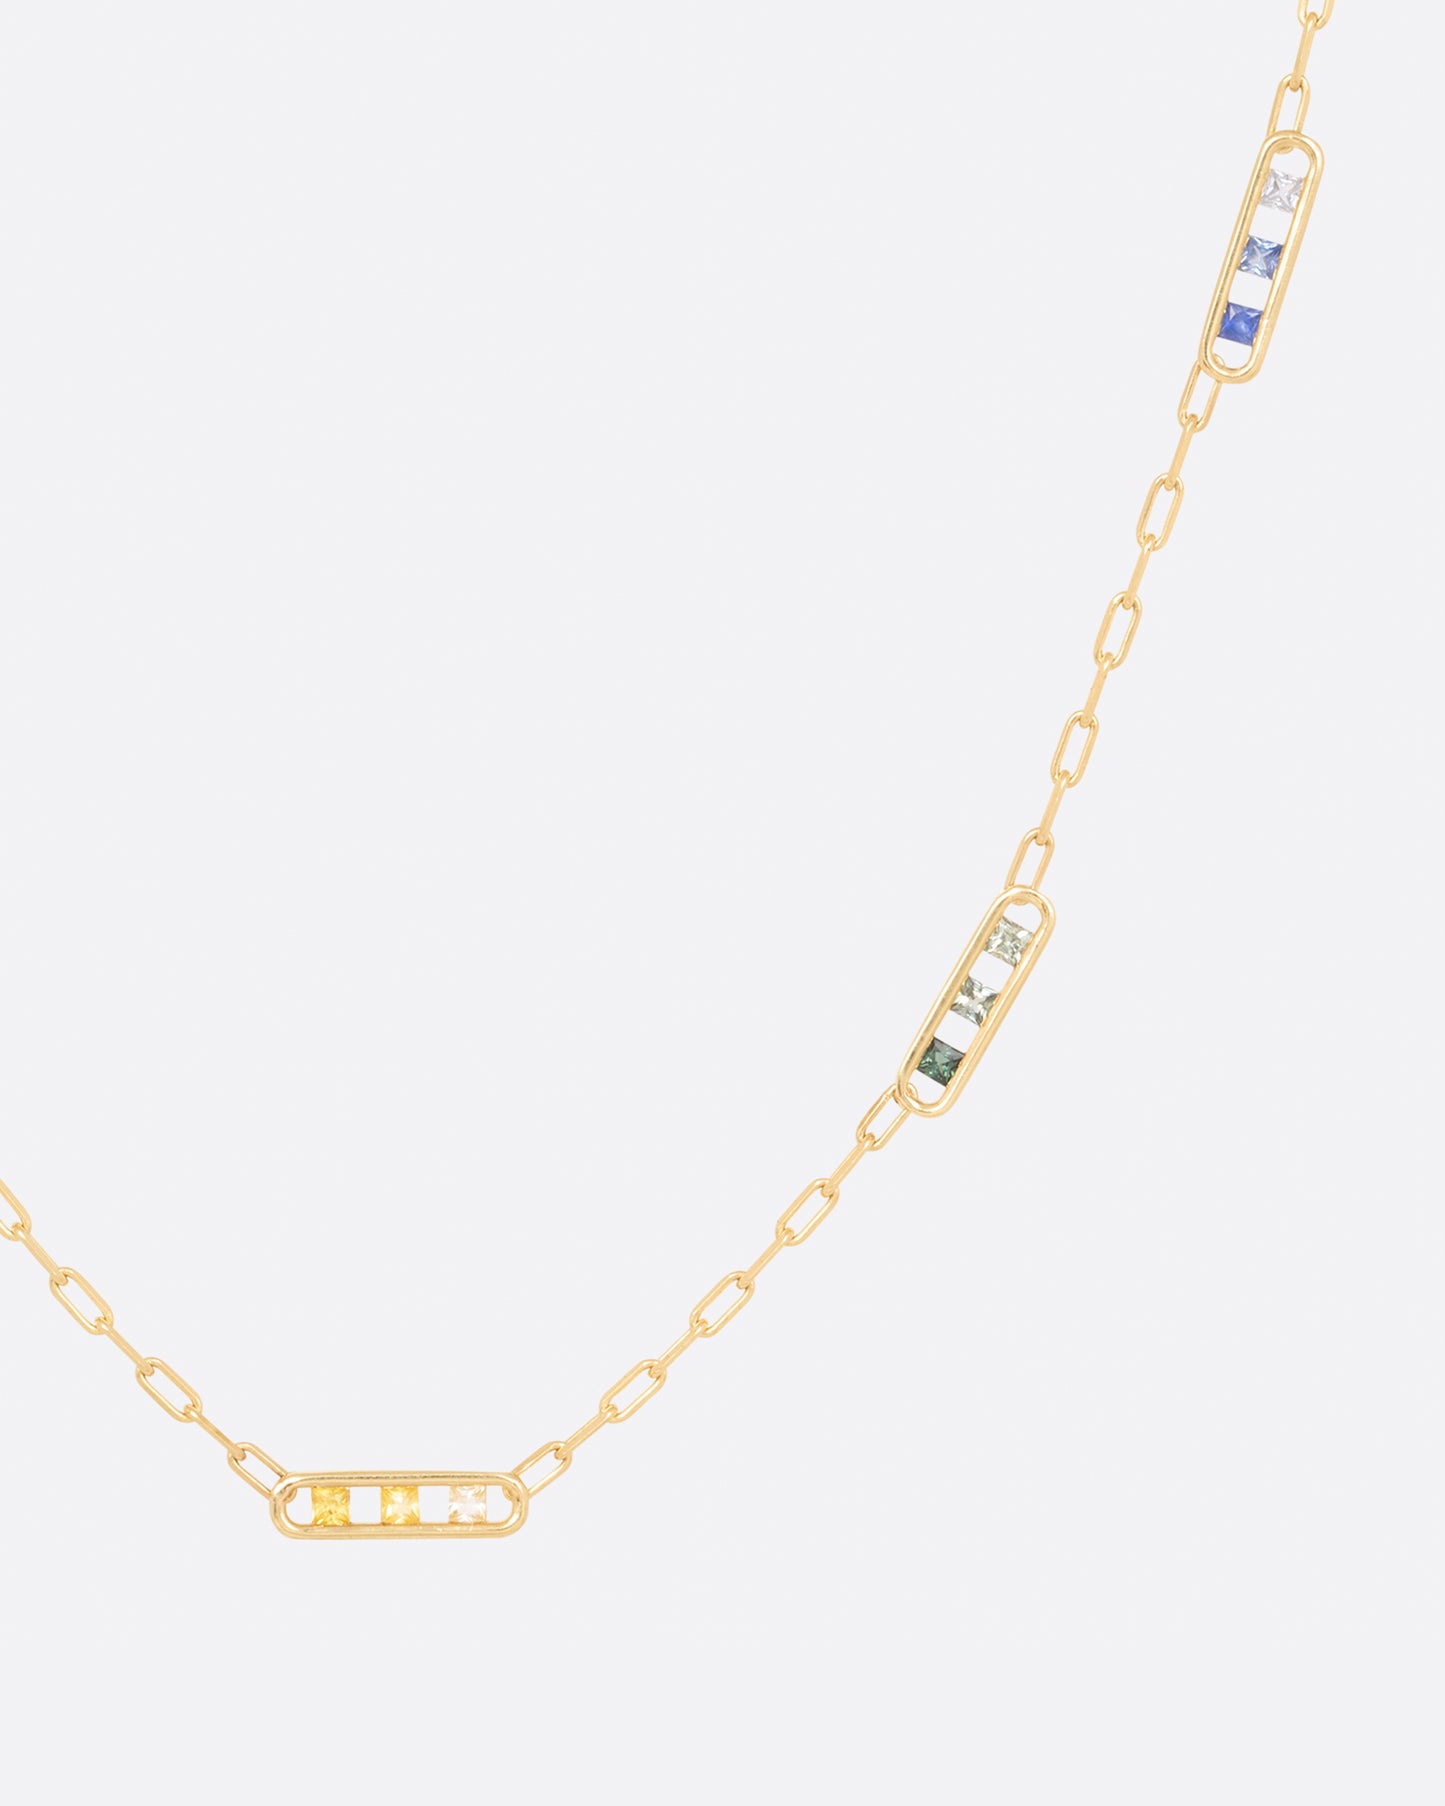 A yellow gold chain necklace with five stations containing princess cut rainbow sapphires, shown hanging on the right.